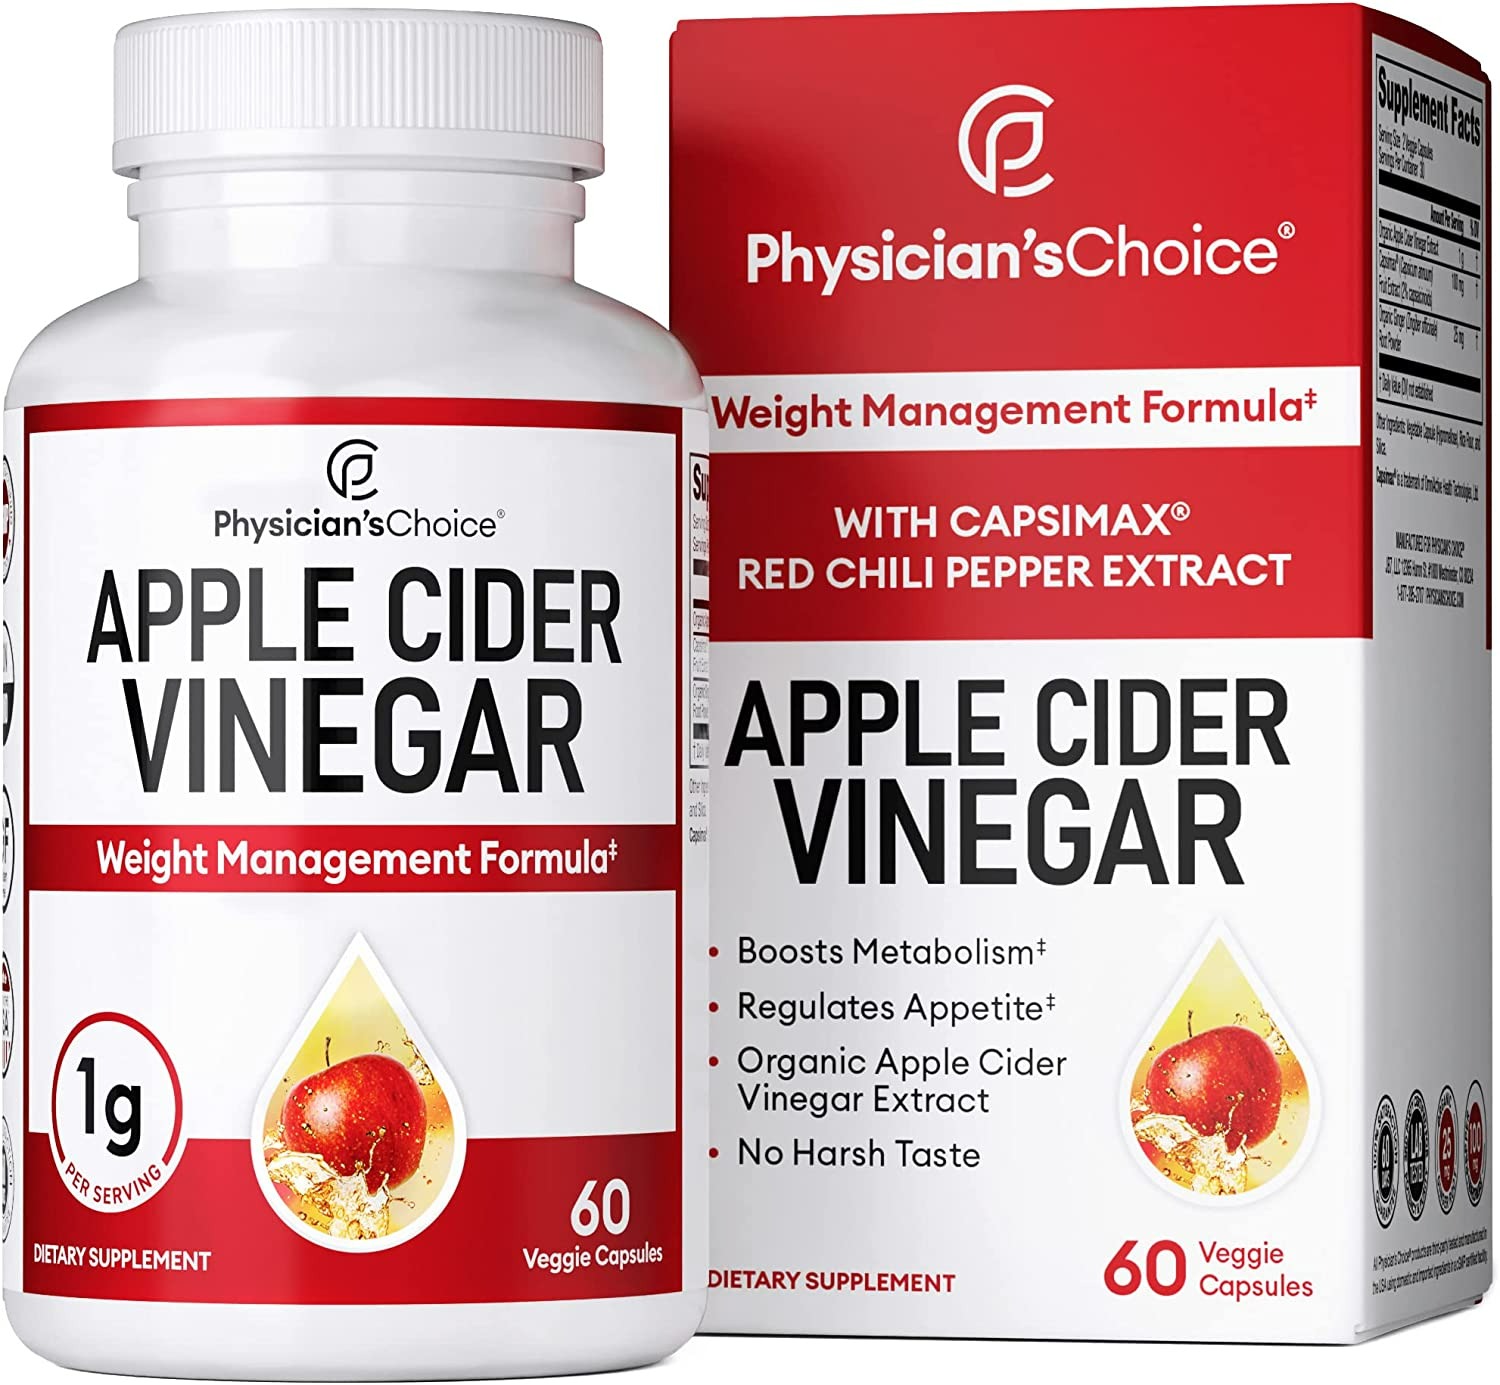 Physician's Choice Organic Apple Cider Vinegar Capsules - Weight Loss Support -  60 Adet-0